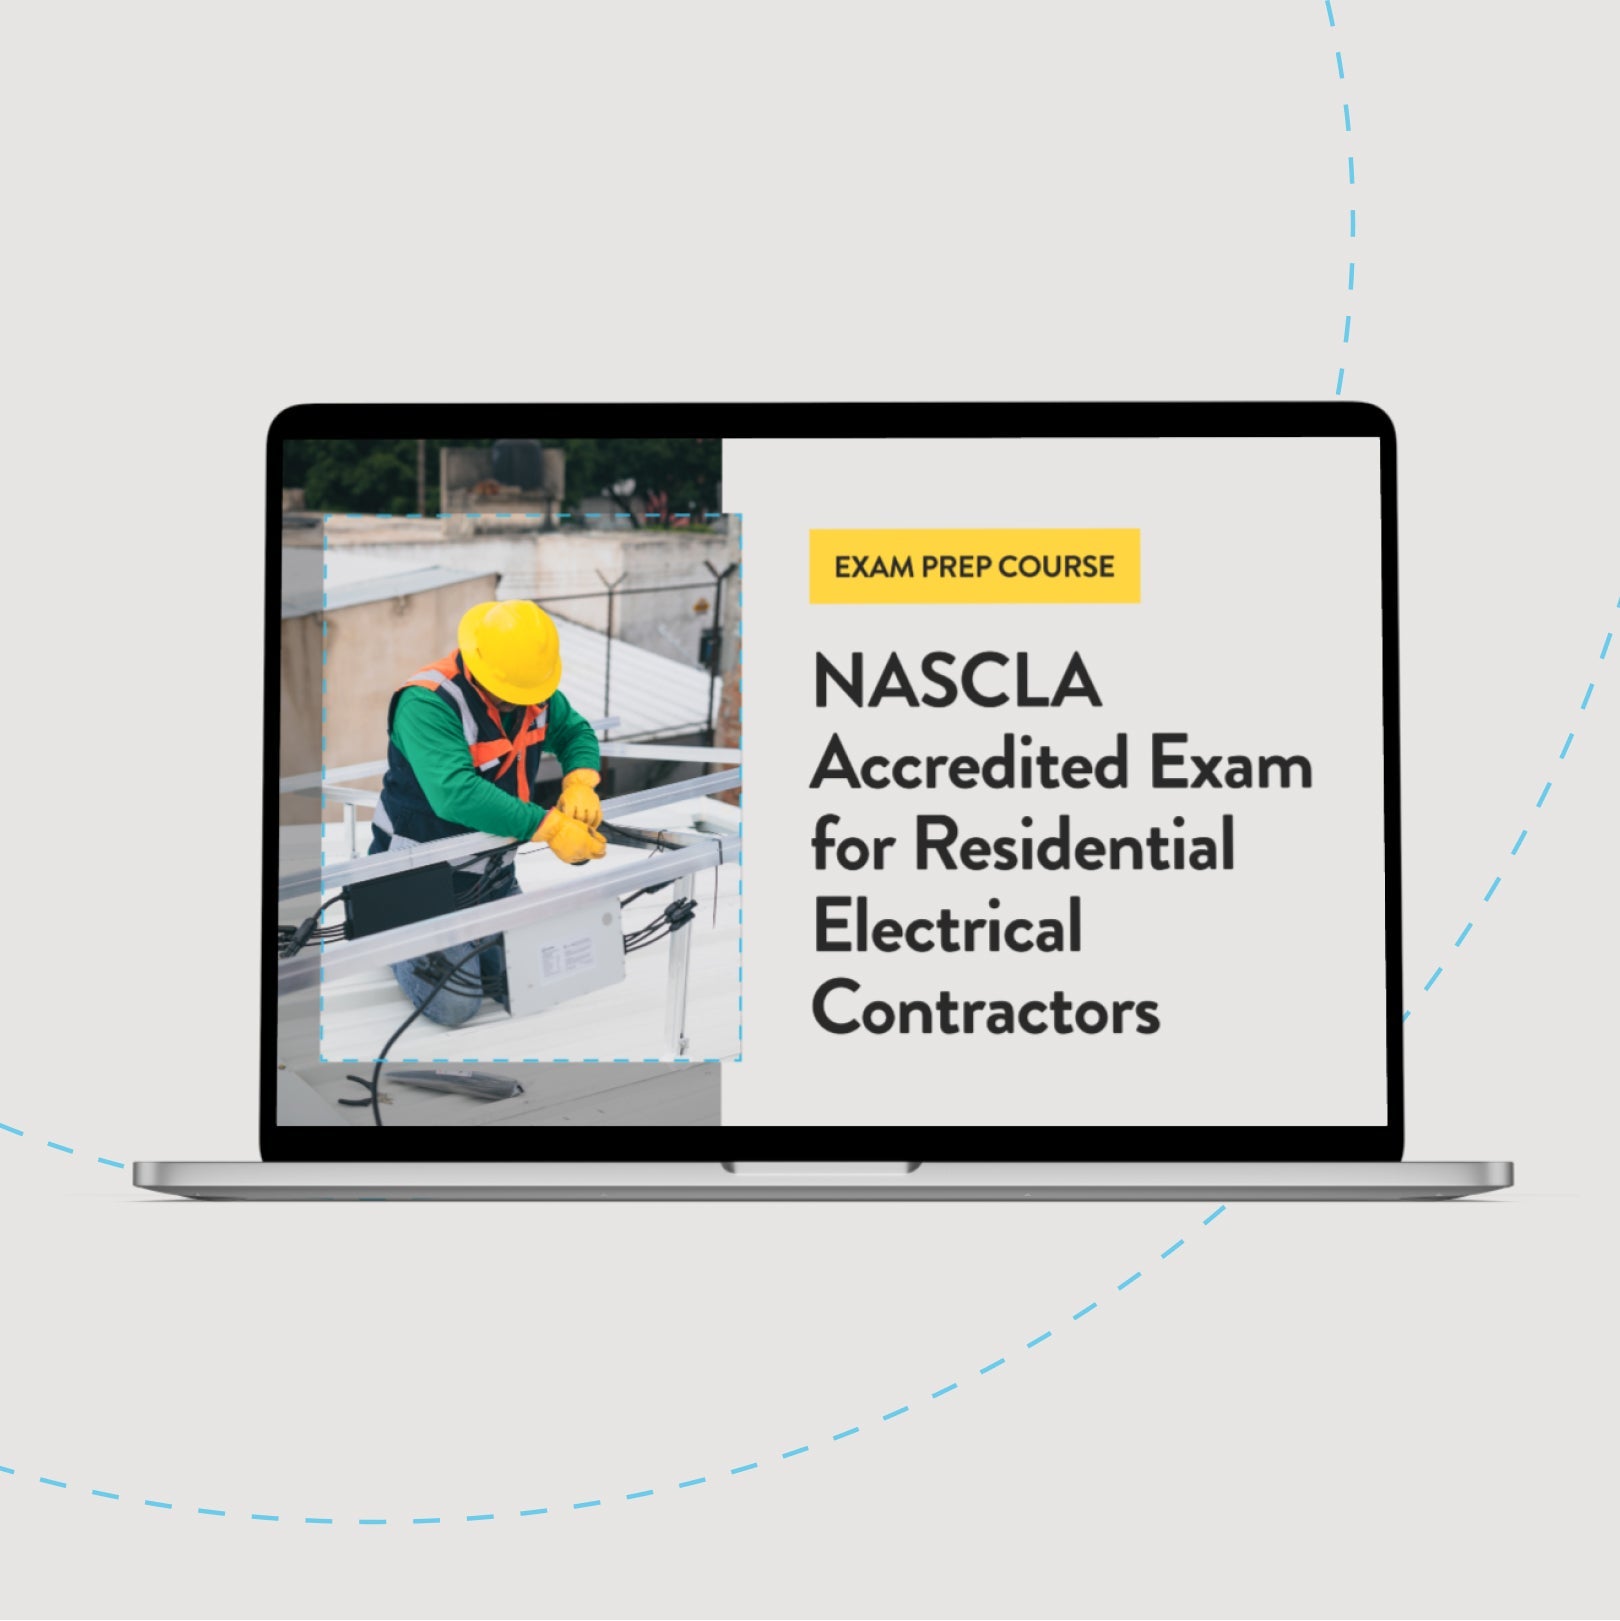 NASCLA Accredited Exam for Residential Electrical Contractors Exam Prep Course